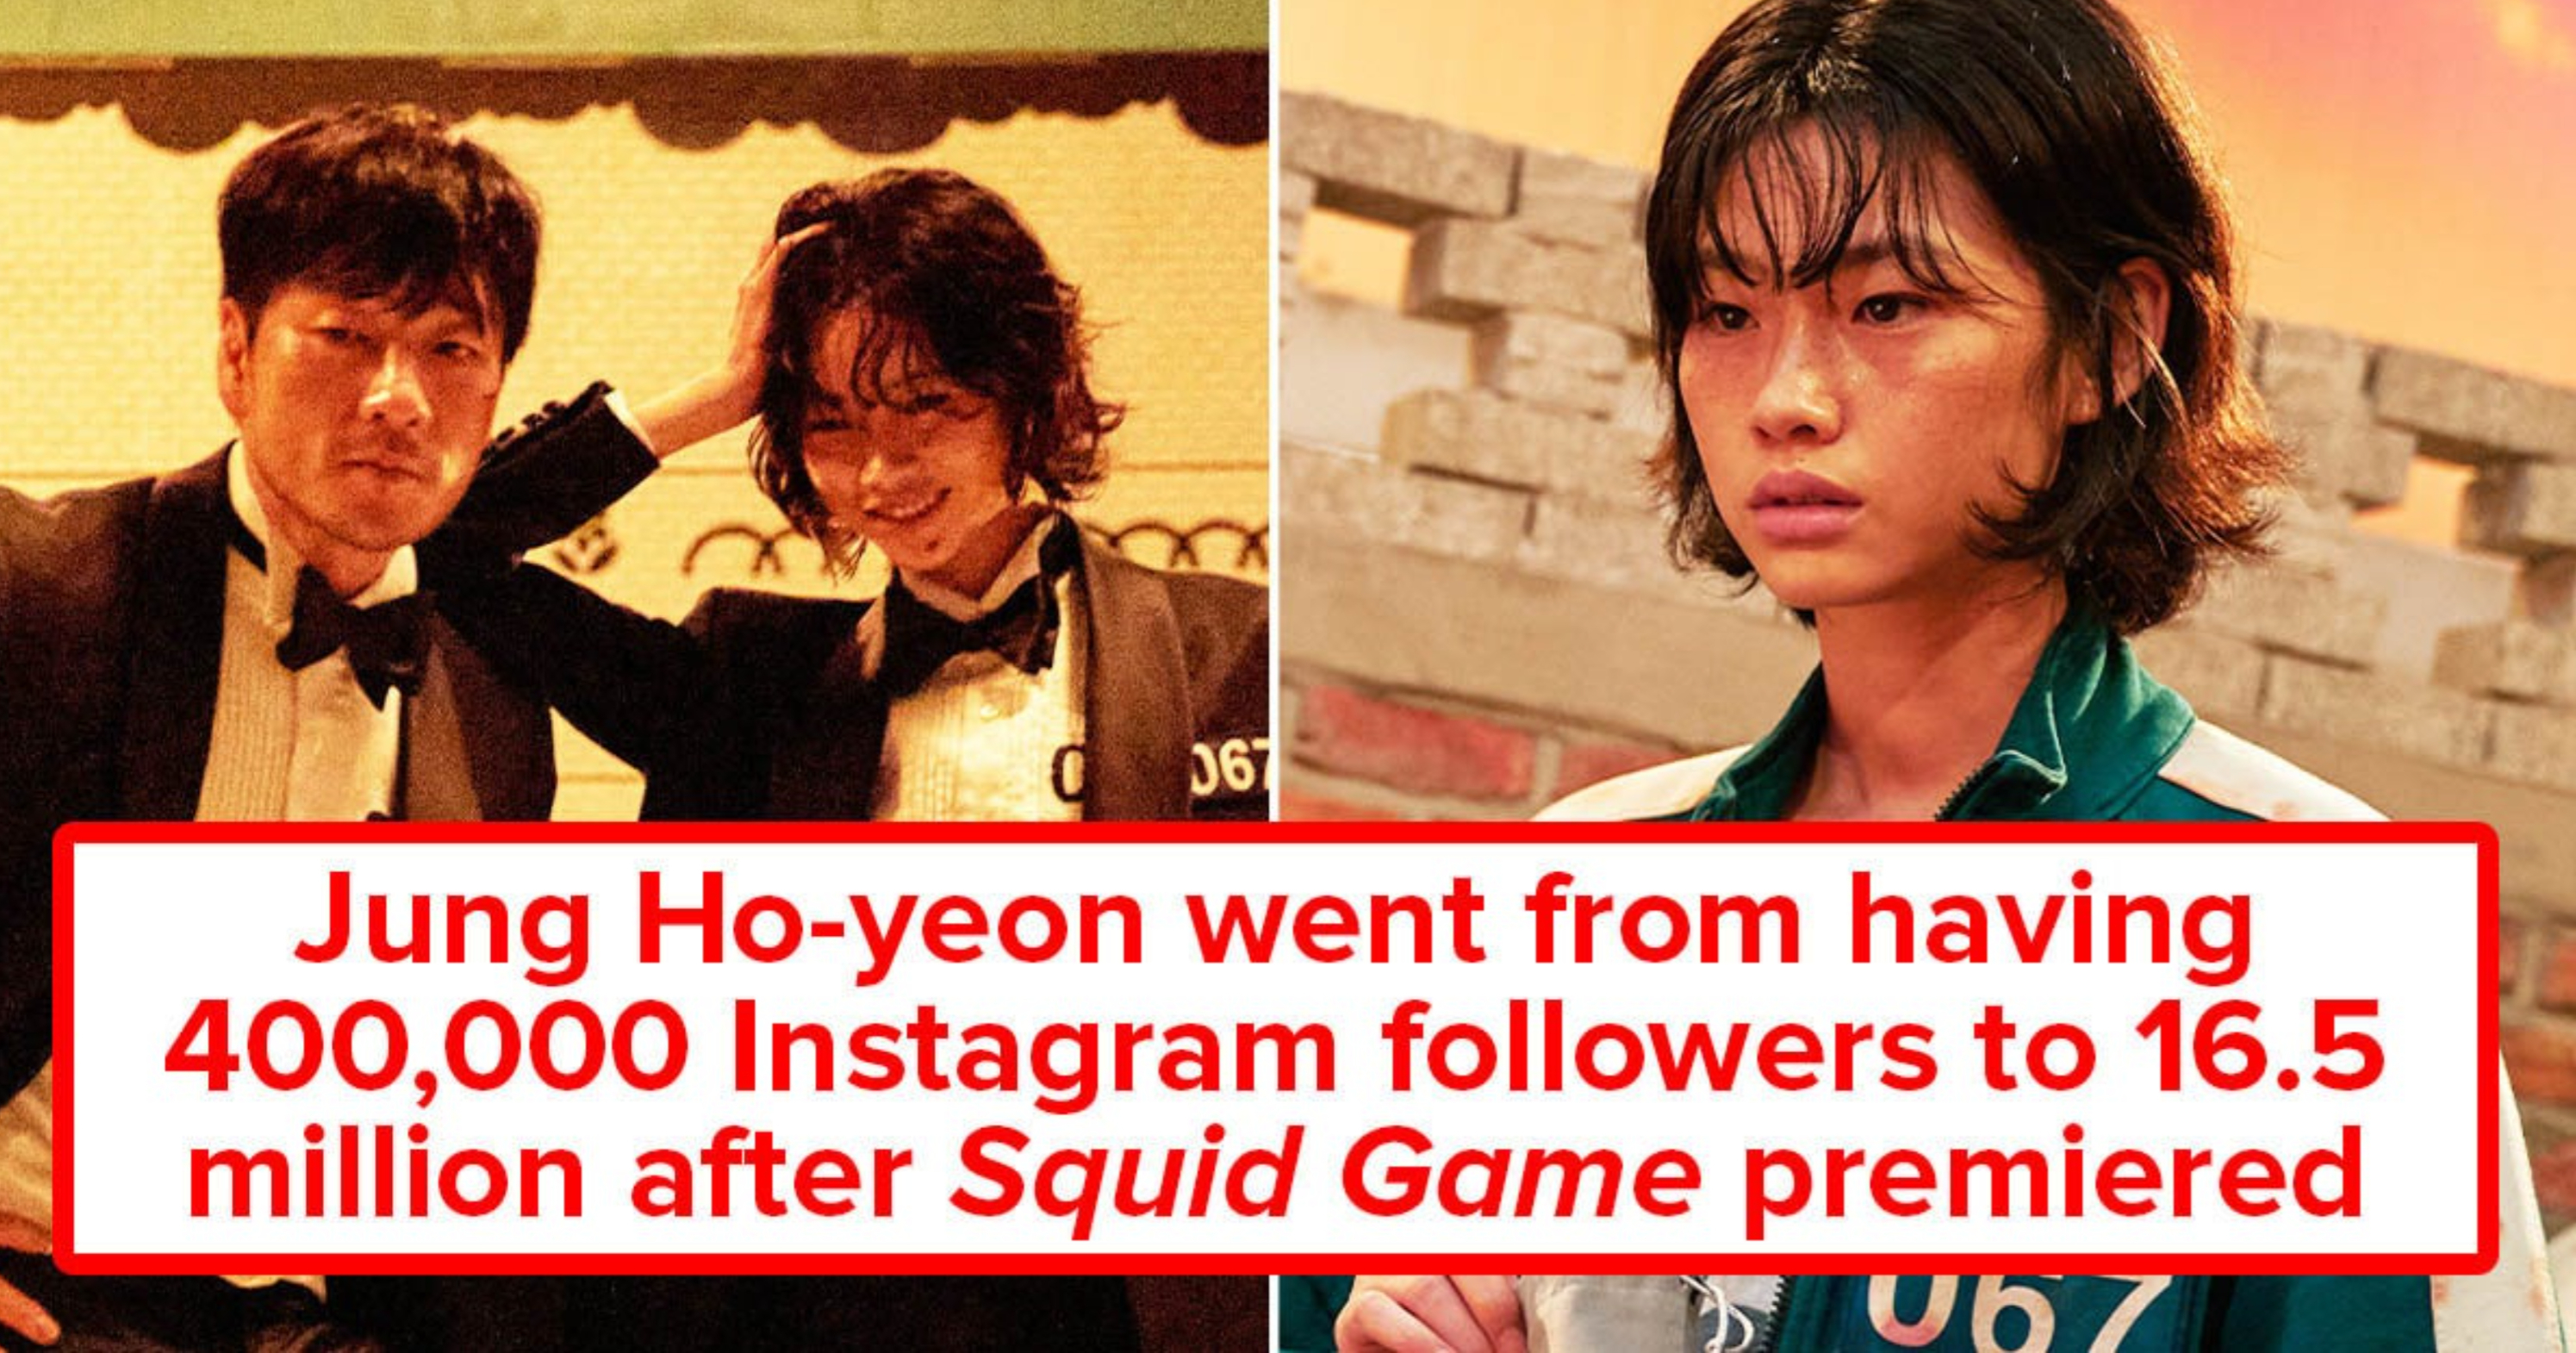 Squid Game's HoYeon Jung's Now Has 56 Times More Instagram Followers